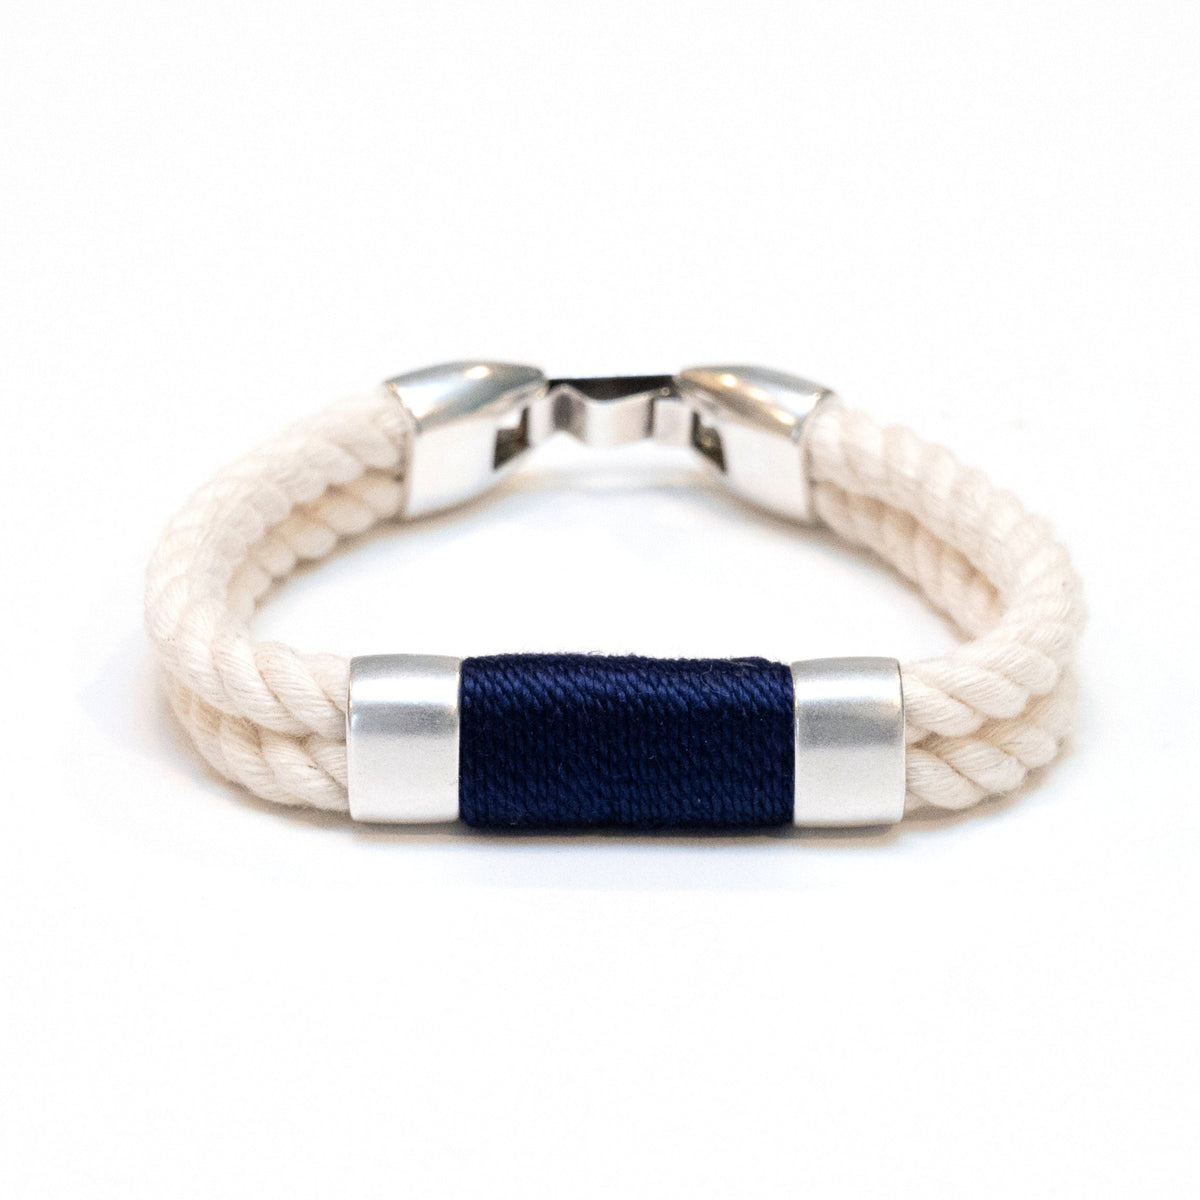 Tremont - Ivory/Navy/Silver